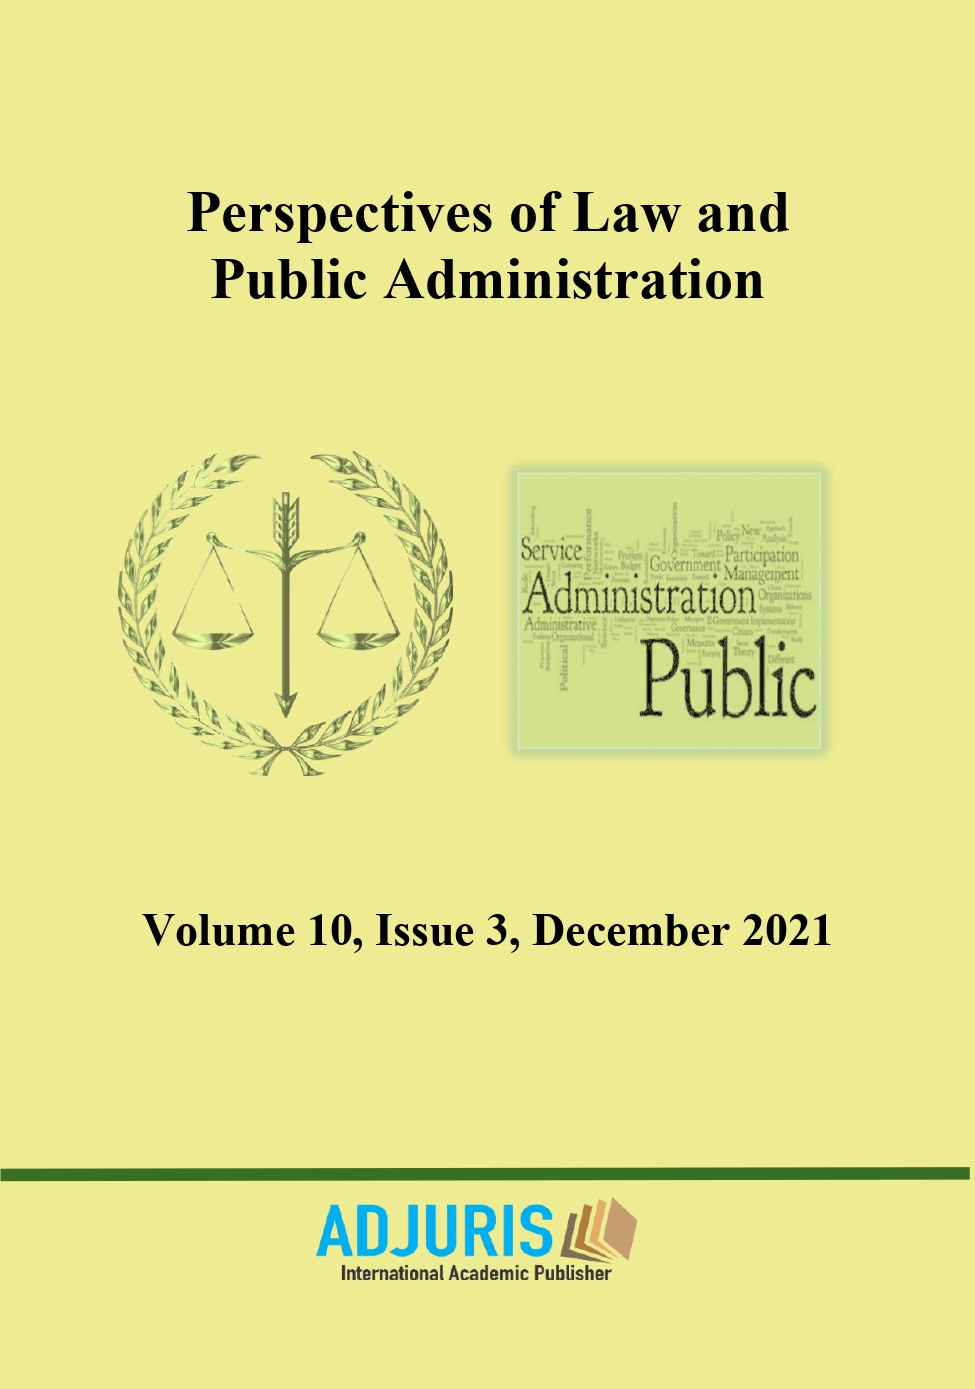 PROVISION OF PUBLIC SERVICES - PROBLEM ASPECTS OF LAW. CASE STUDY